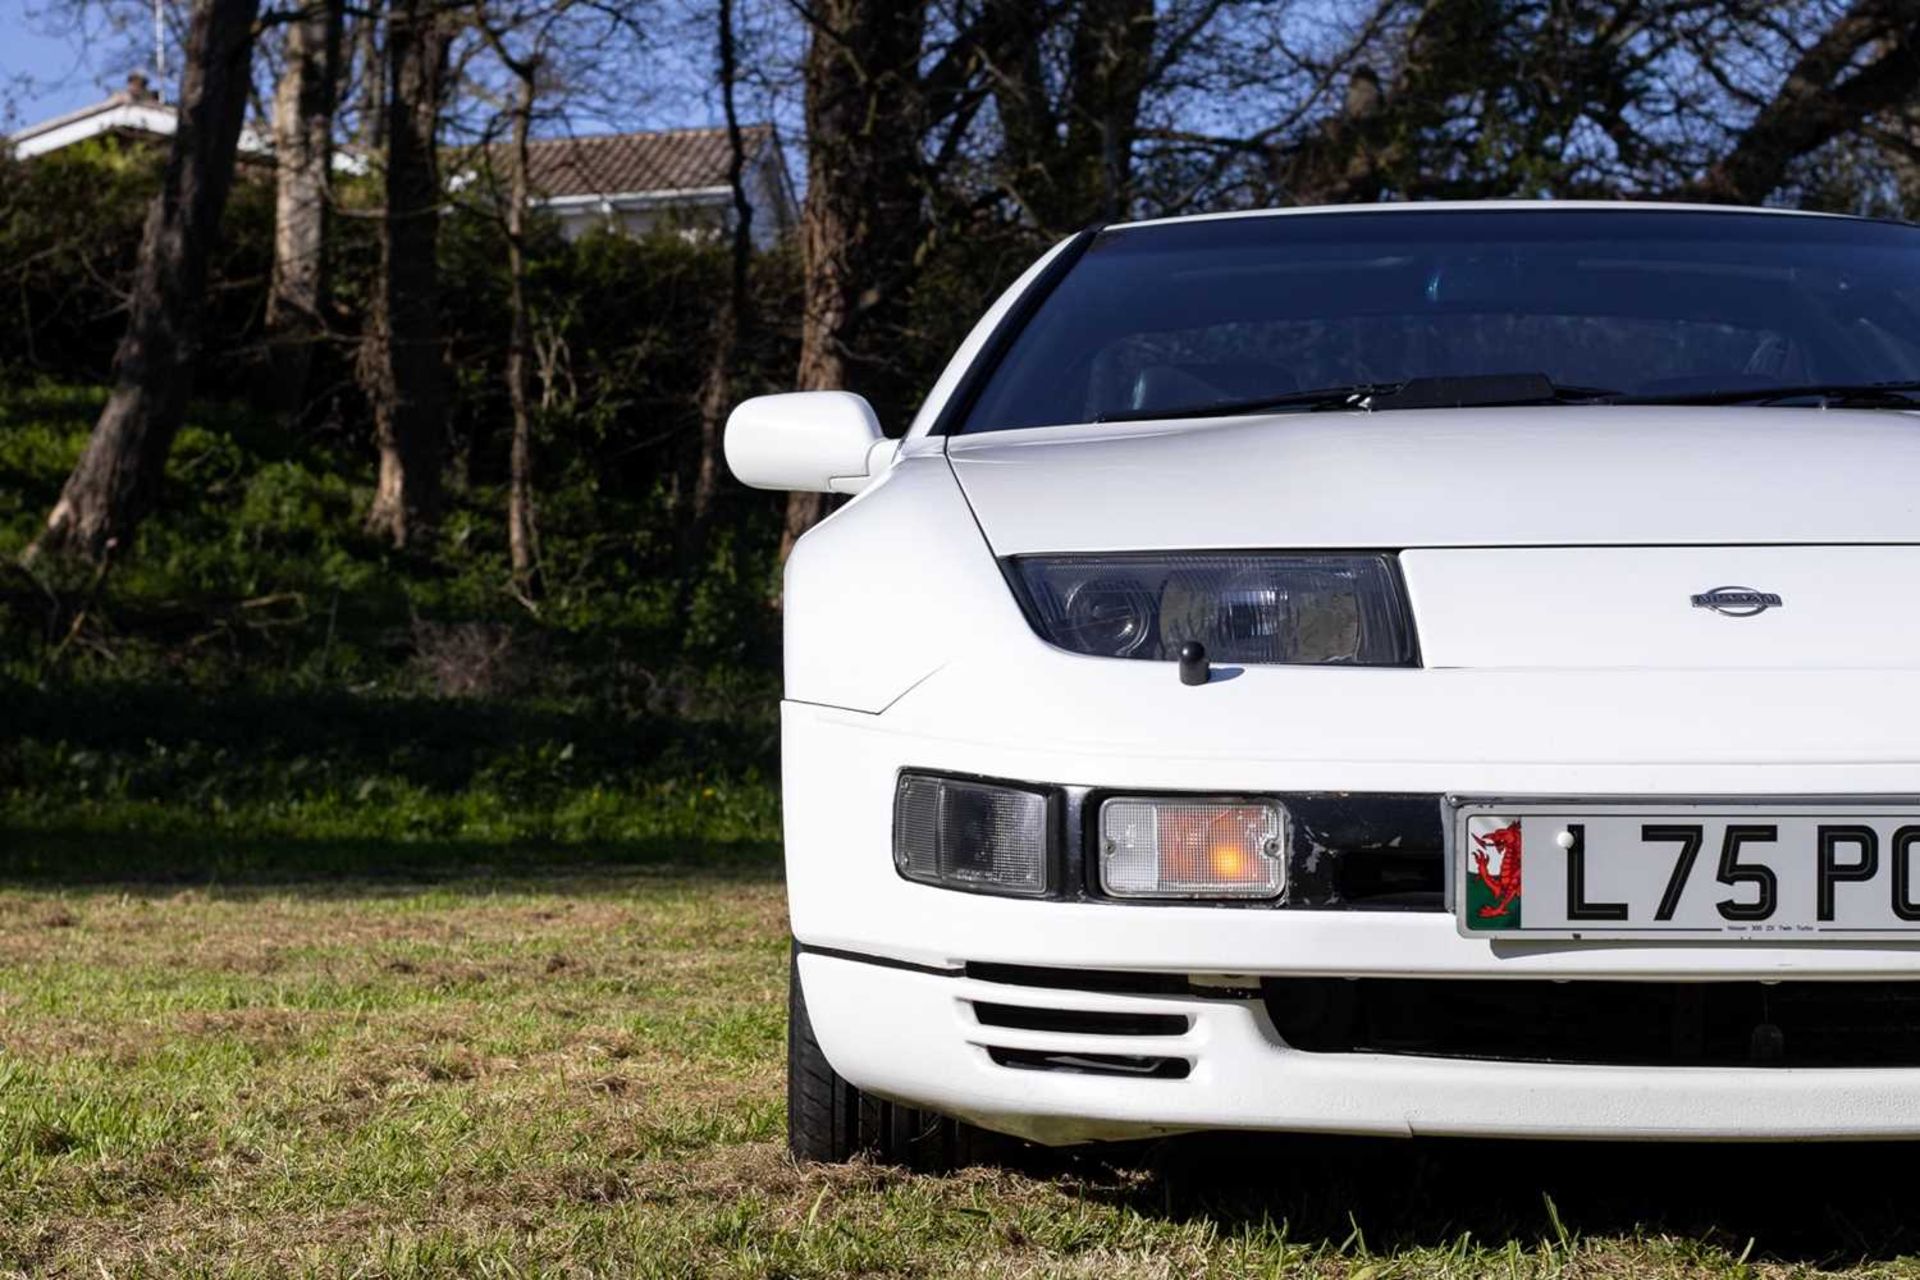 1990 Nissan 300ZX Turbo 2+2 Targa One of the last examples registered in the UK - Image 35 of 89